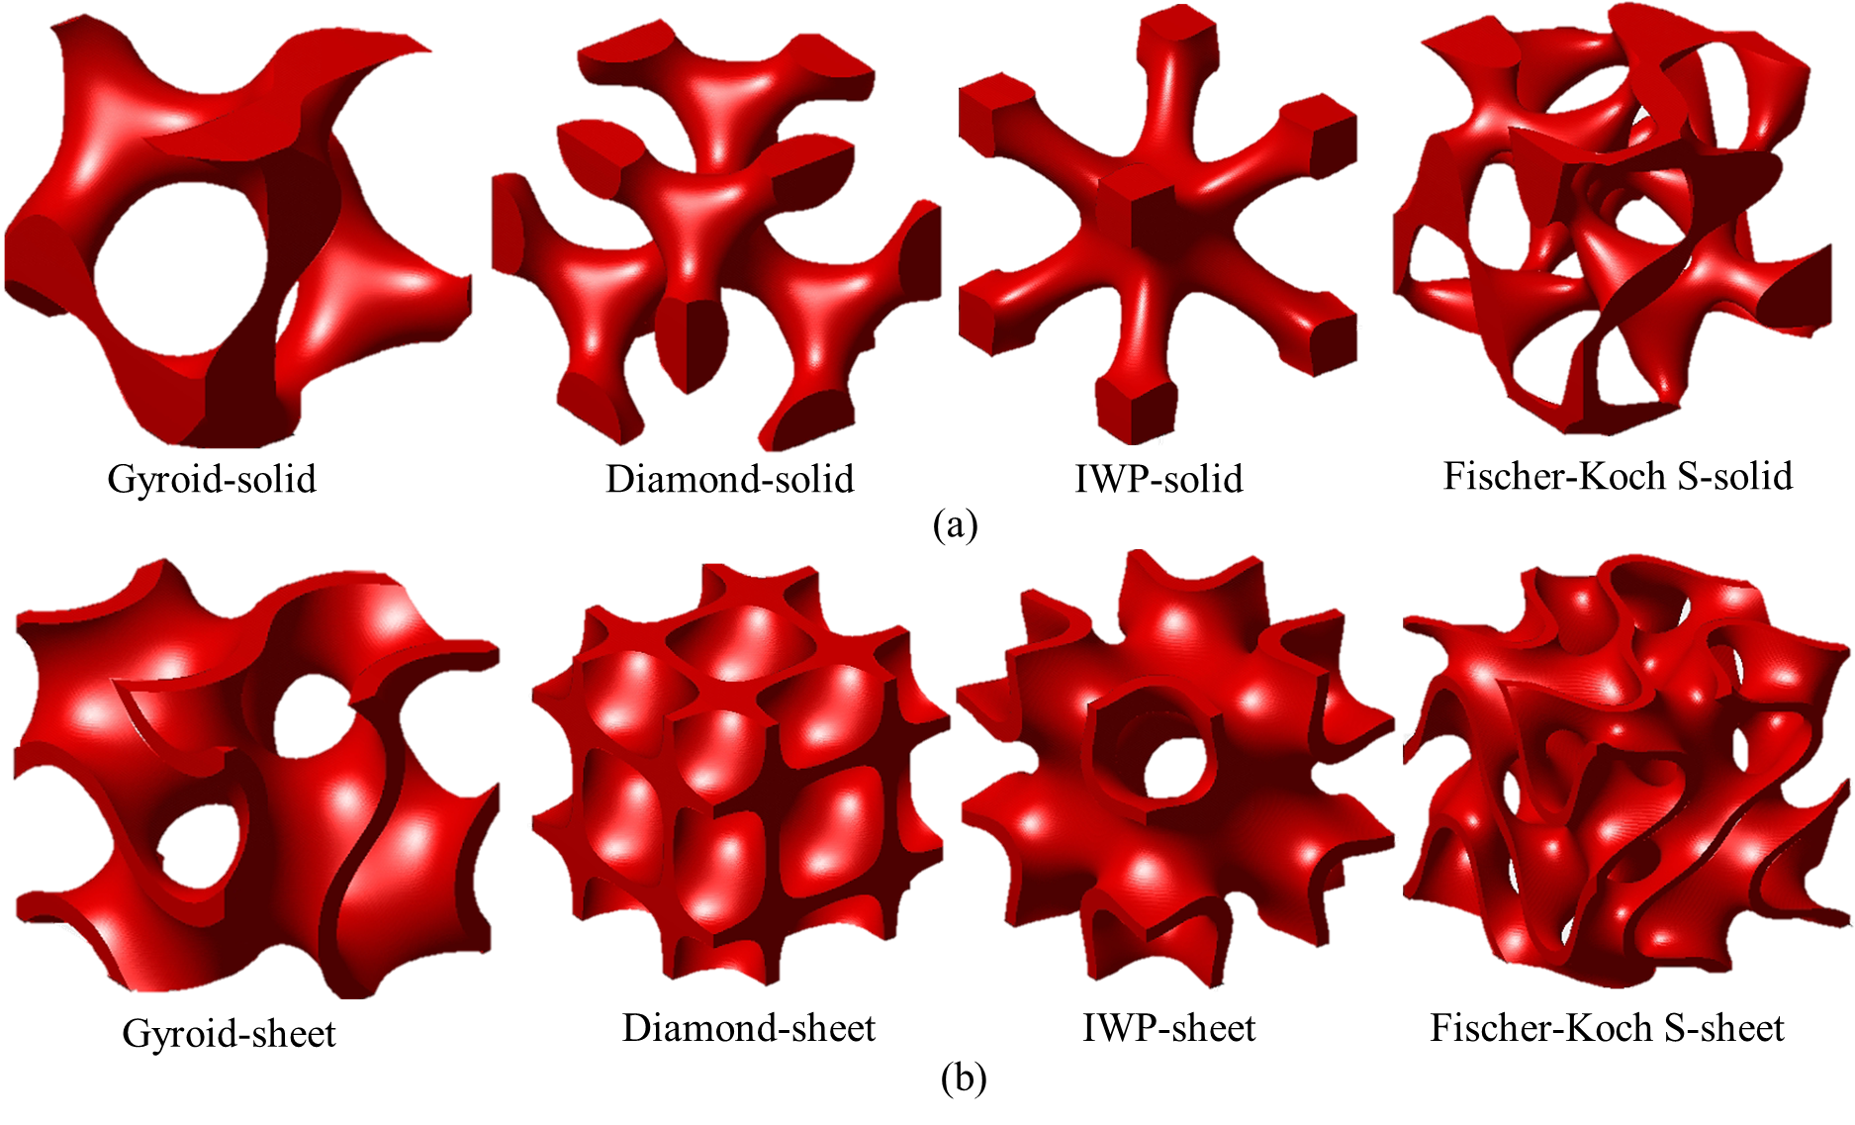 Examples of solid- and sheet-based TPMS lattices.